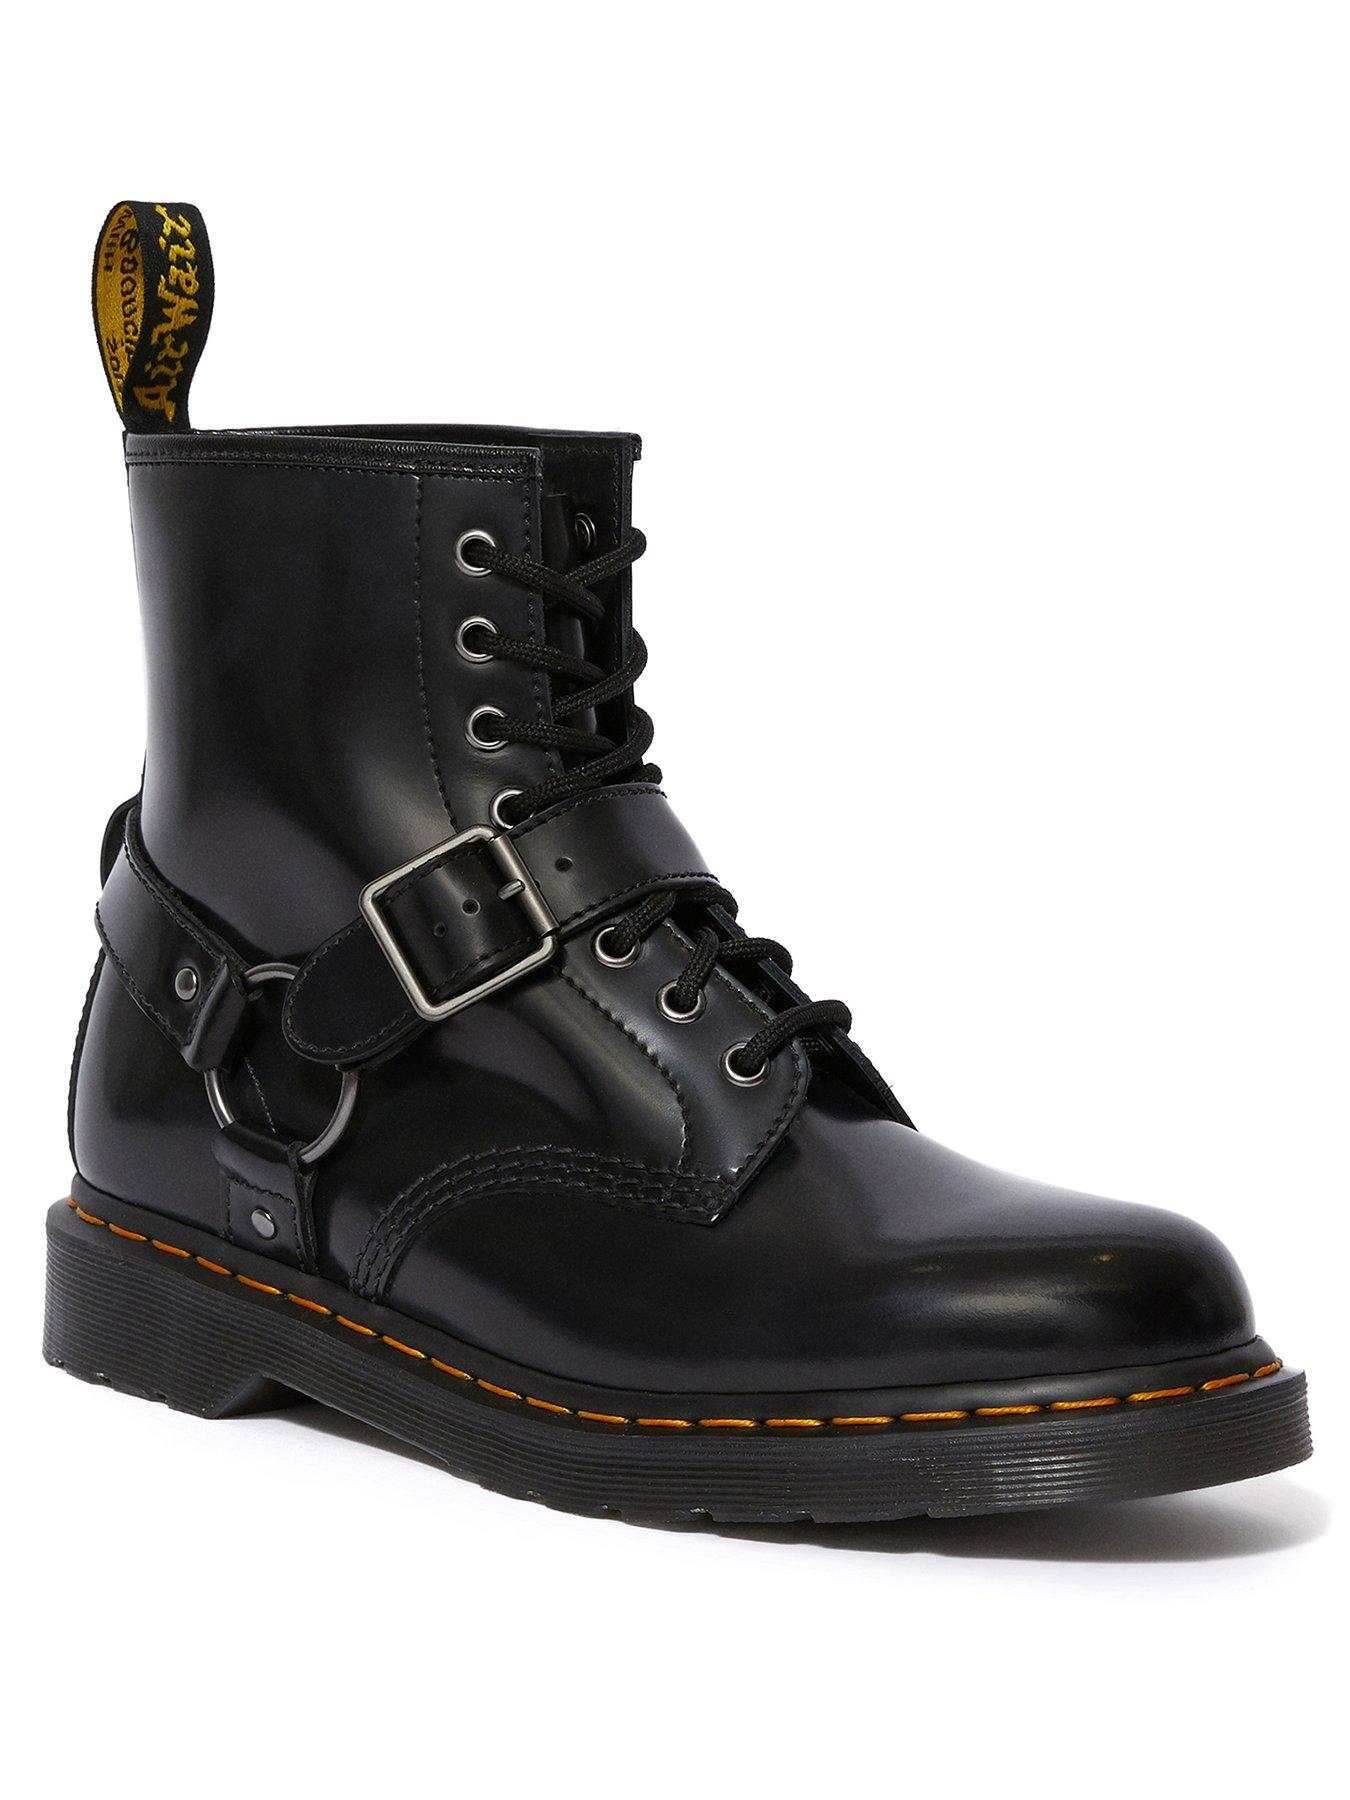 Dr Martens Women's Boots | Very.co.uk